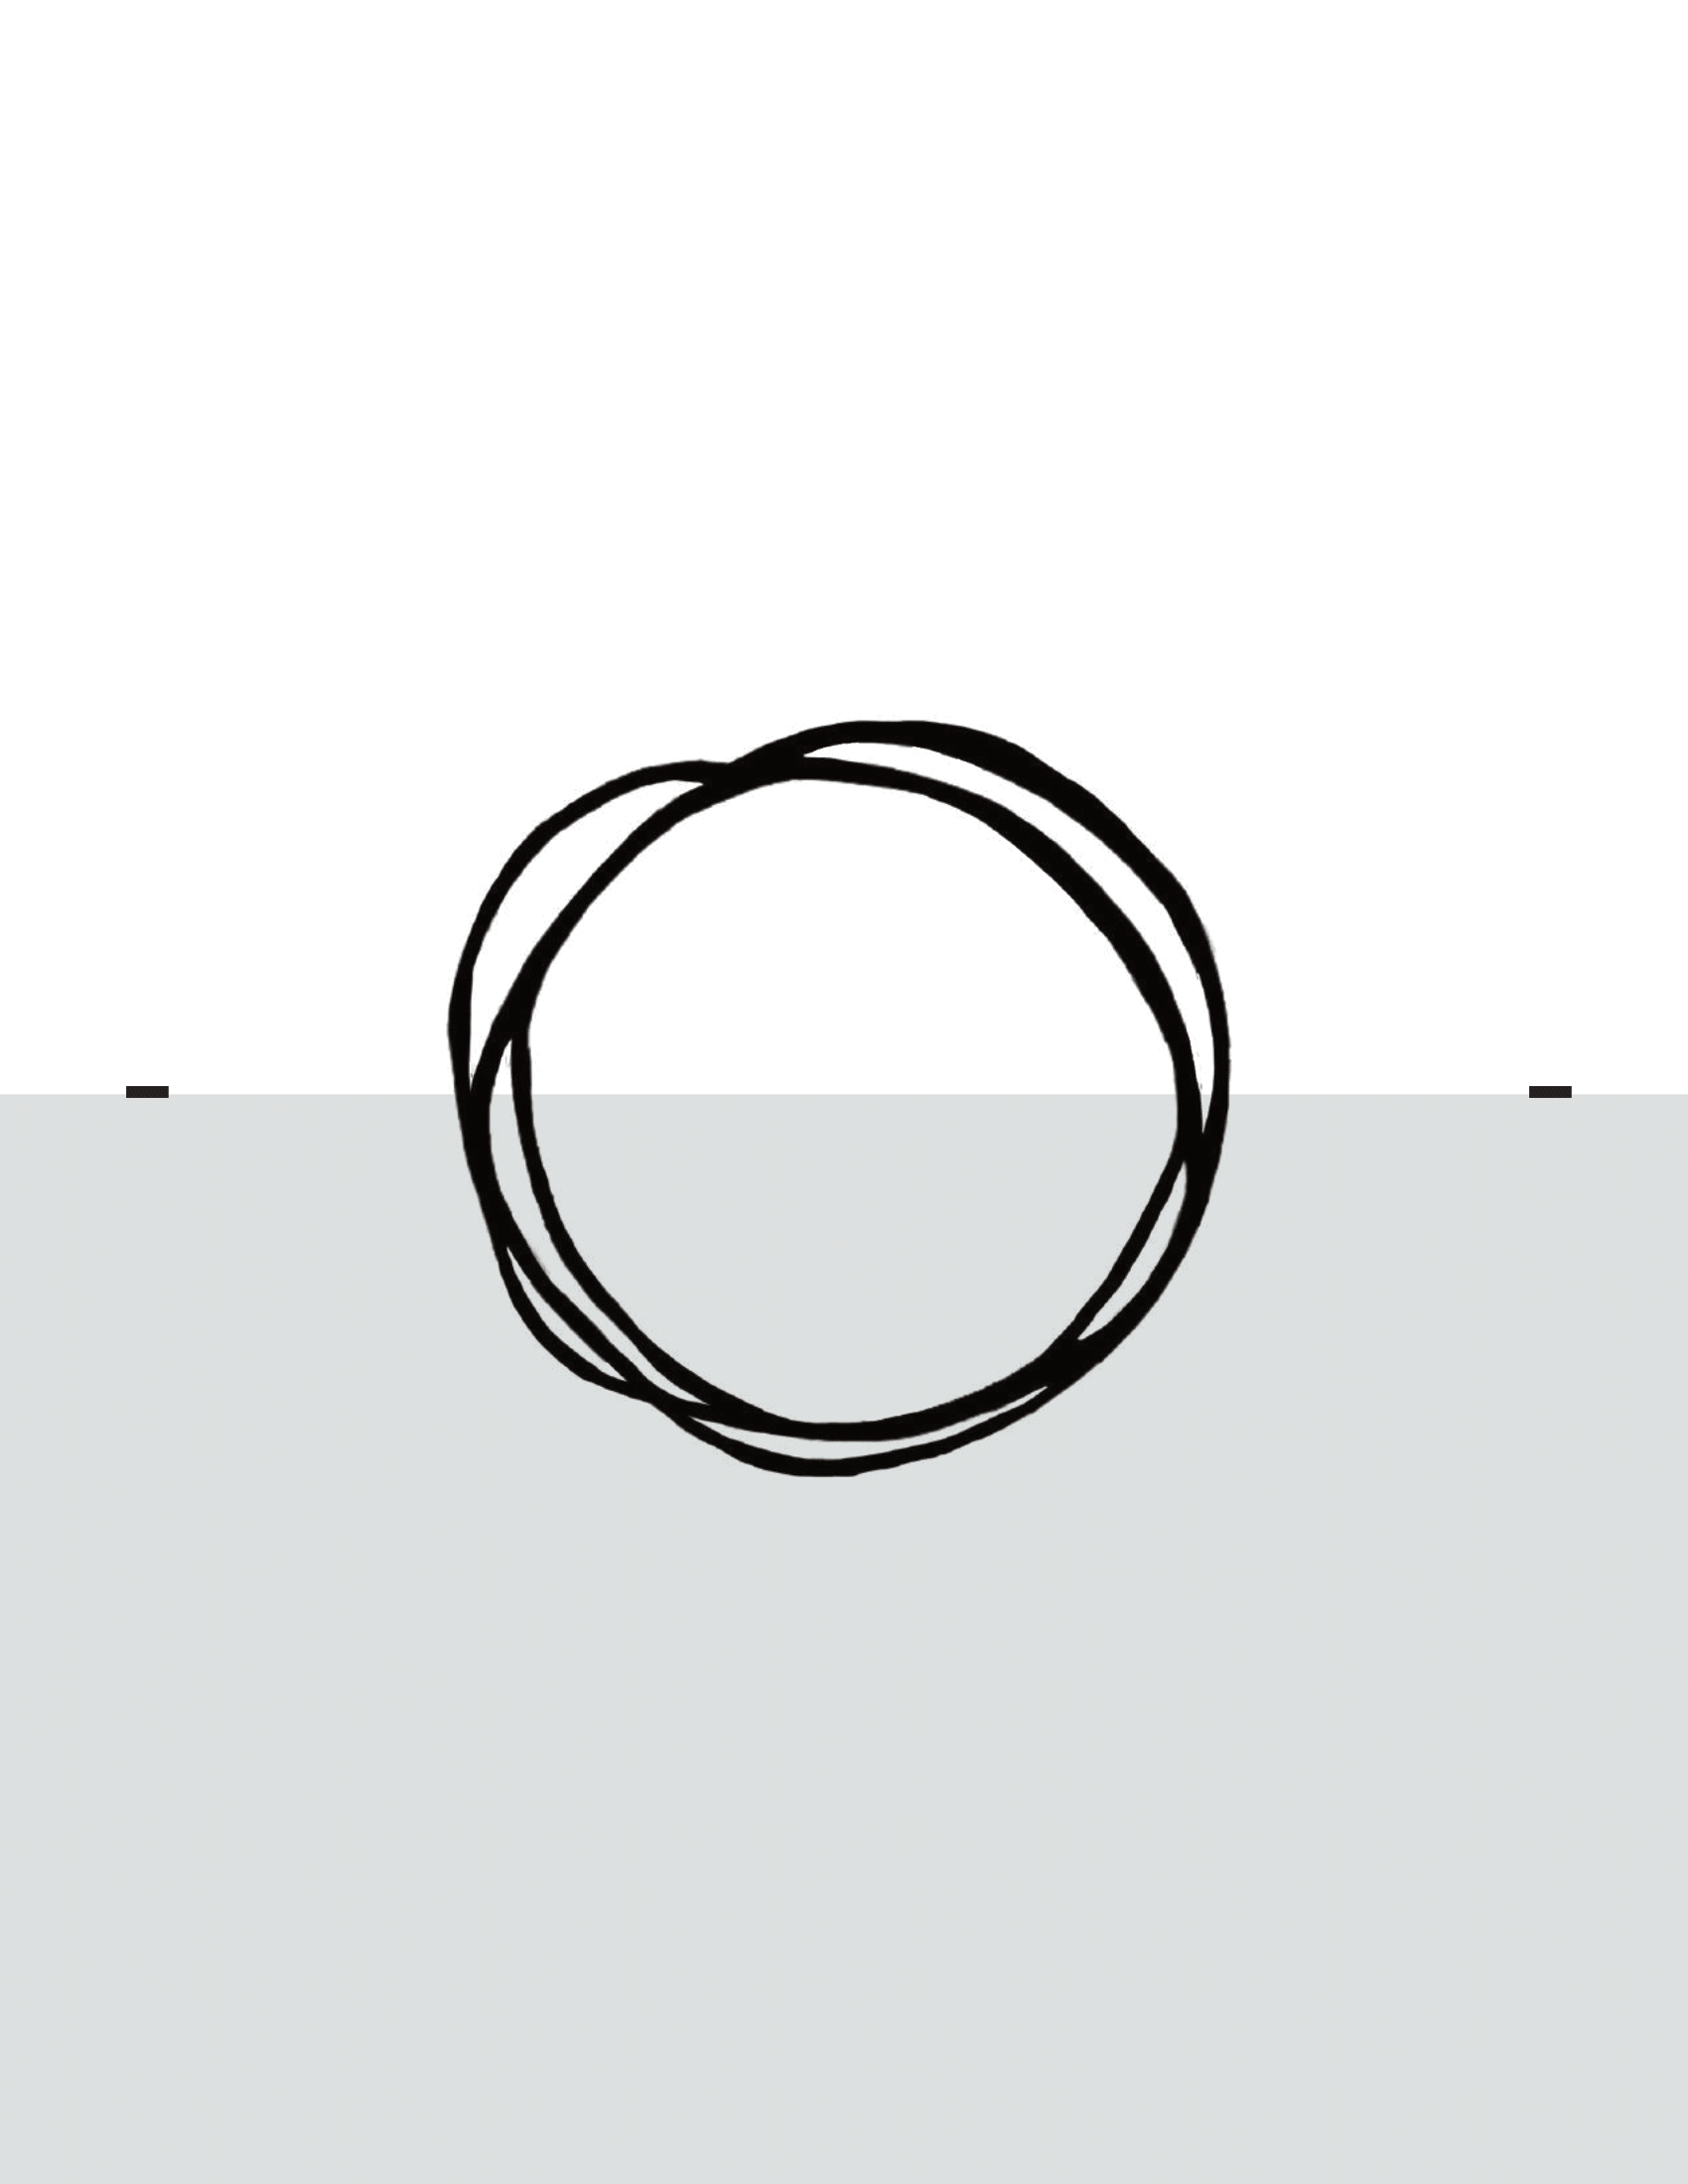 LOOP for Symbiontmag (1)-min-26.png